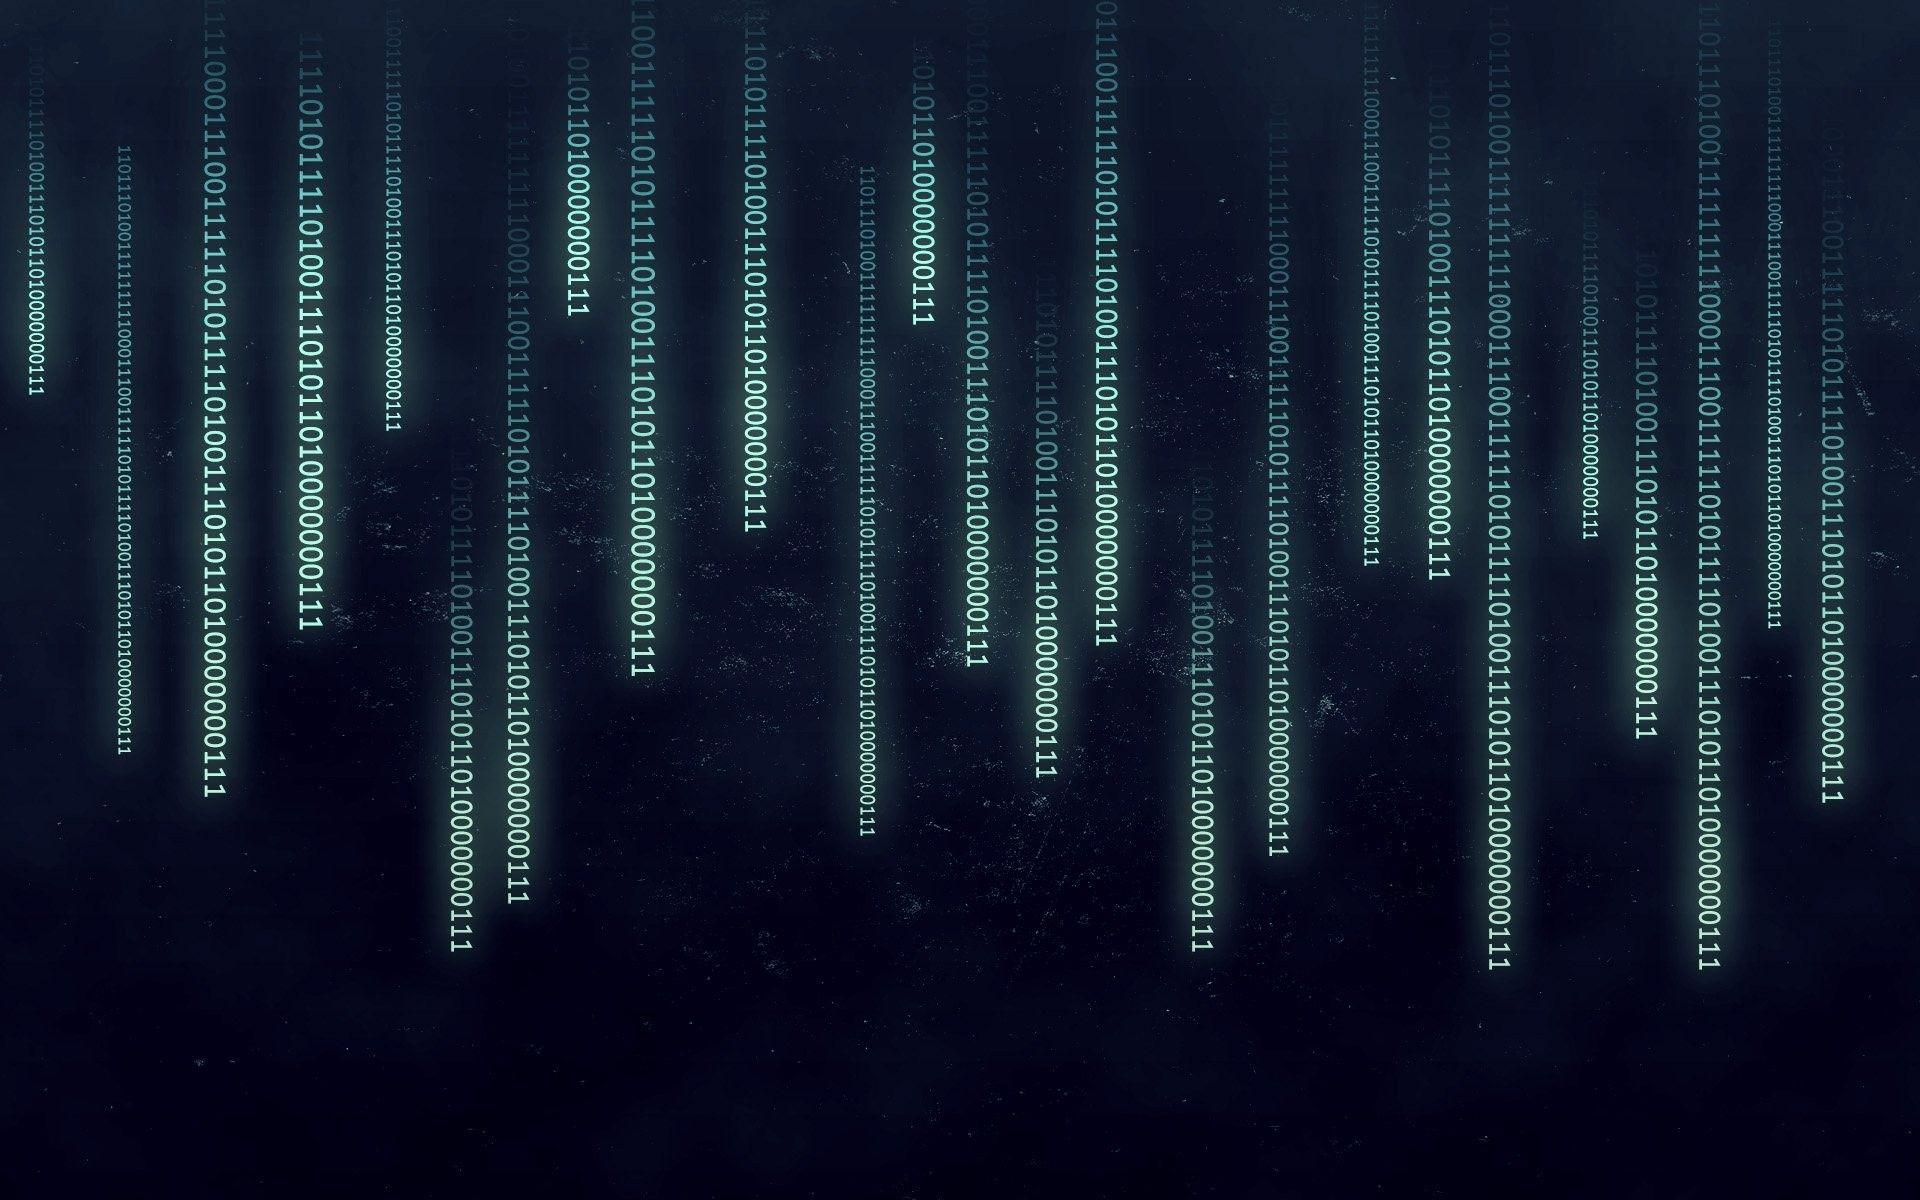 Computer science wallpaperDownload free full HD background